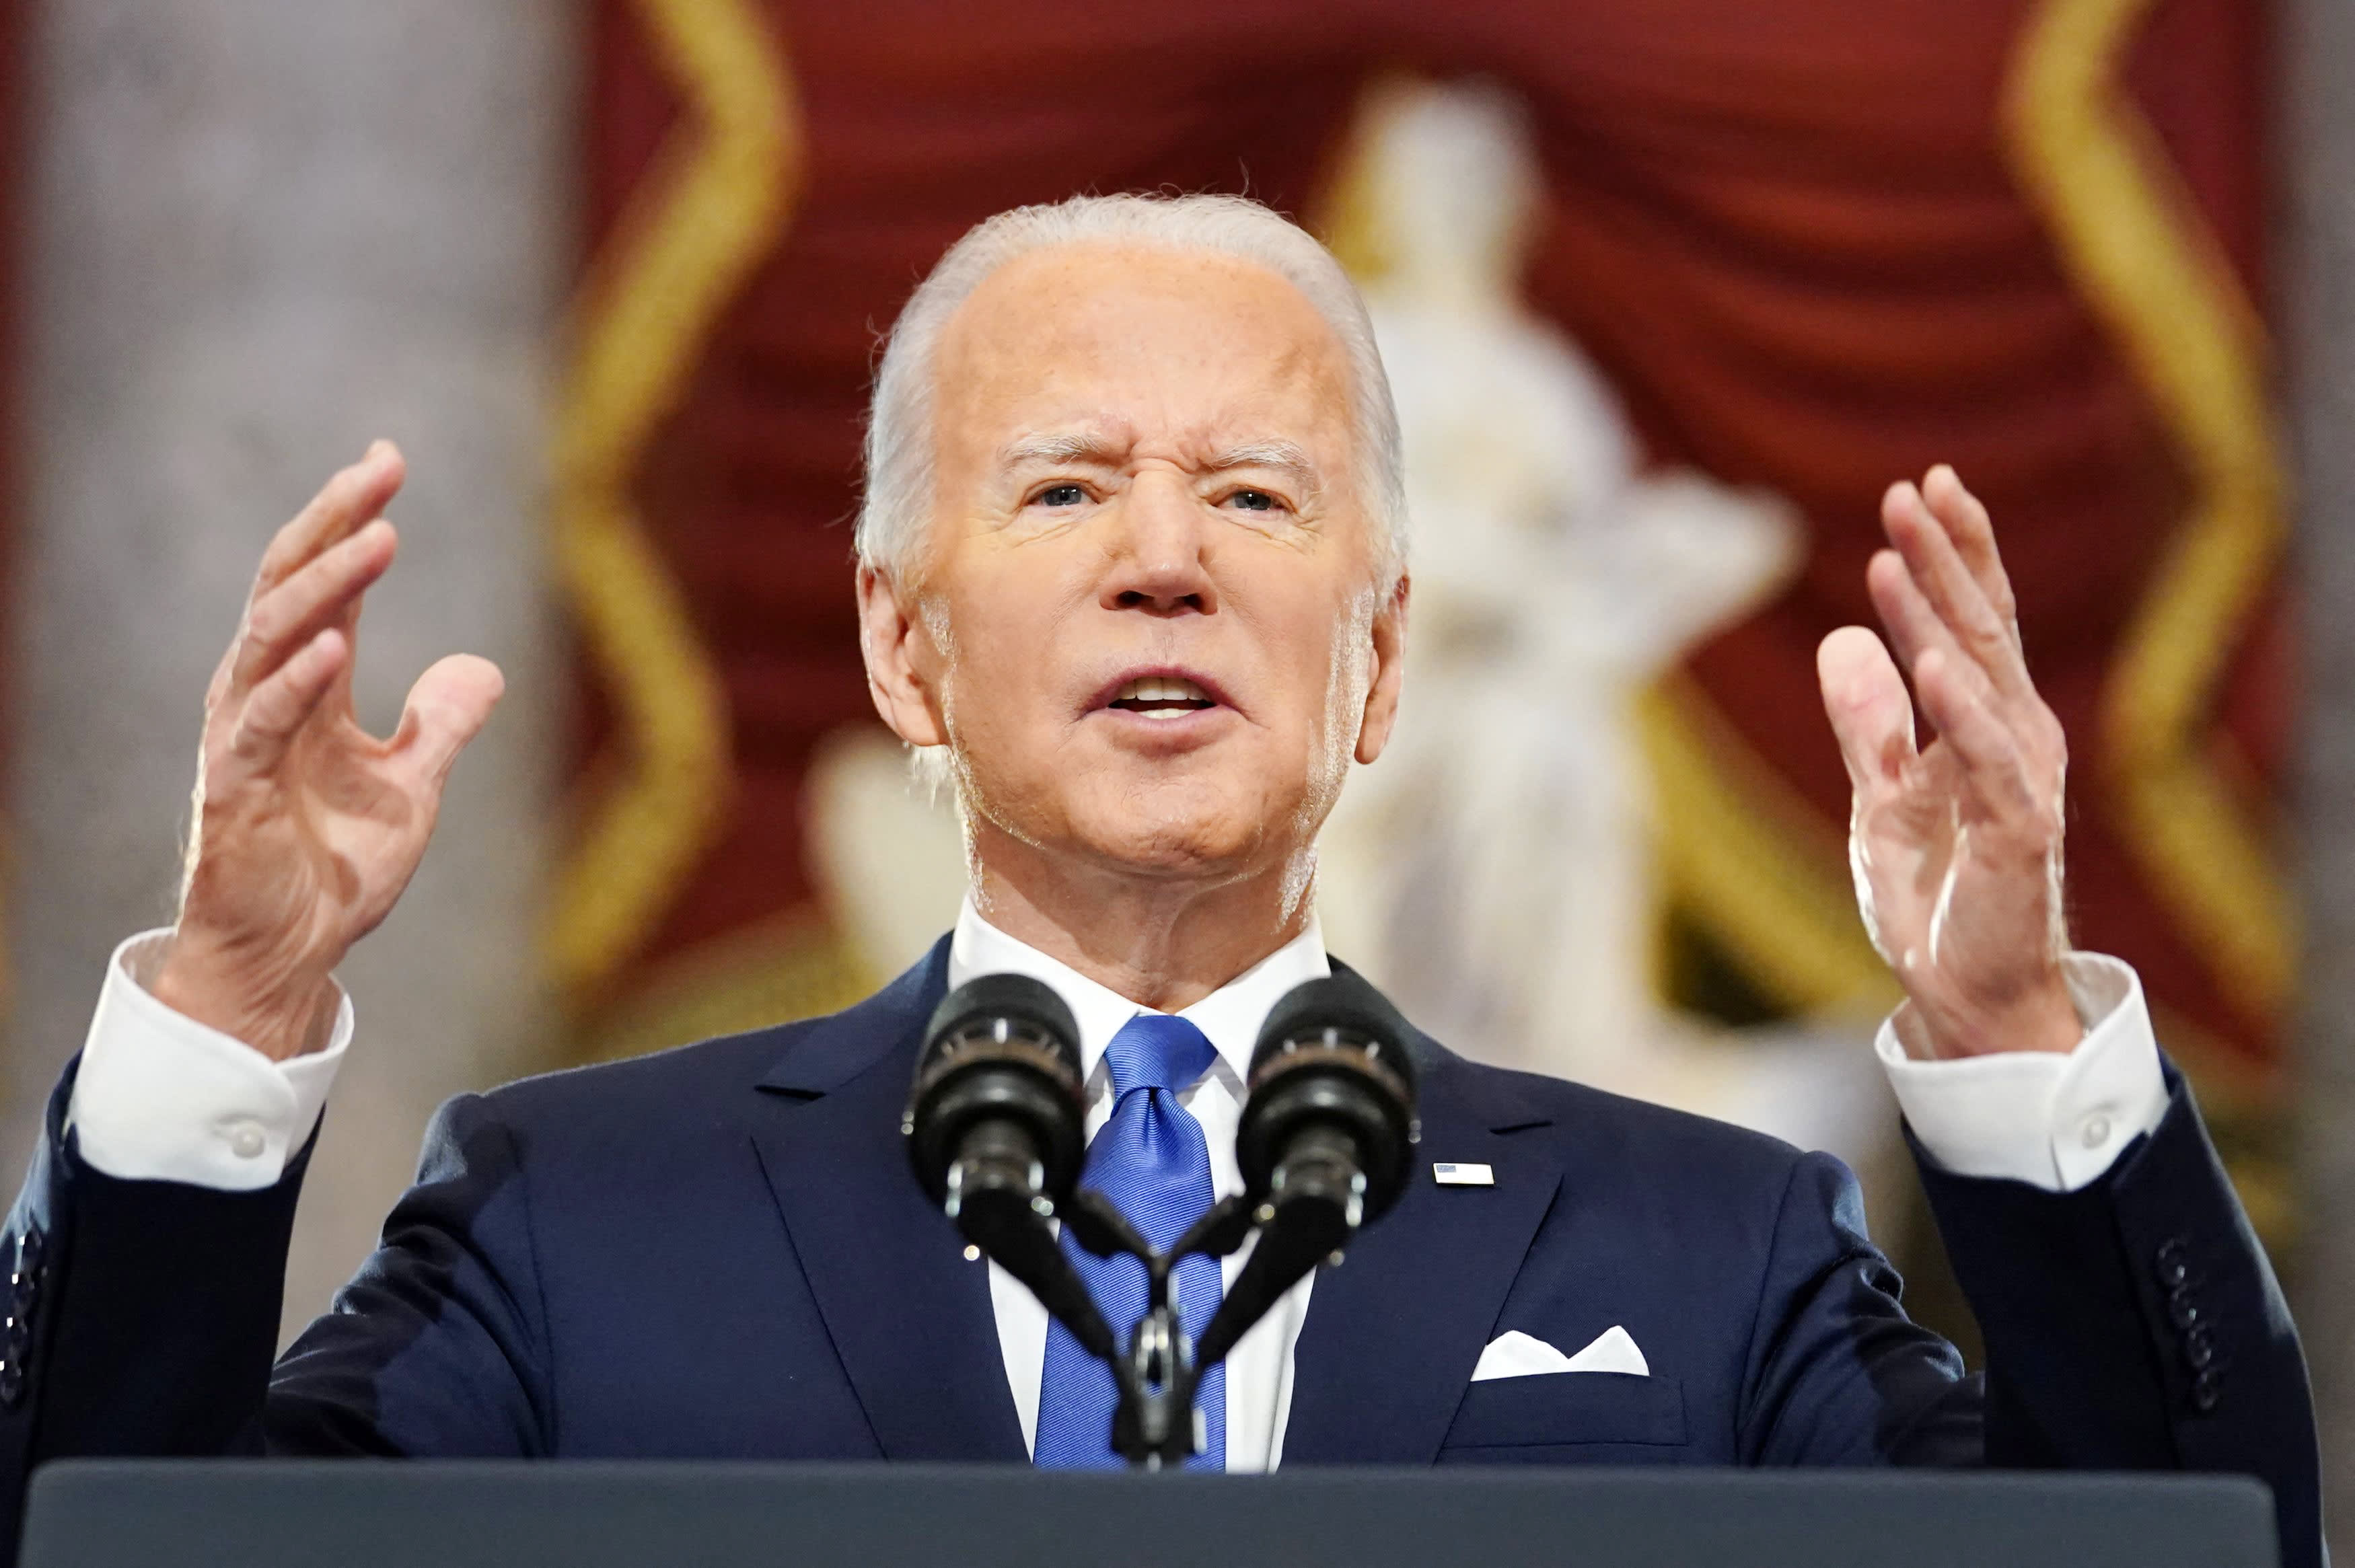 ‘You can’t love your country only when you win’: Biden urges Americans to defend the right to vote, condemns Trump election lies on Jan. 6 anniversary